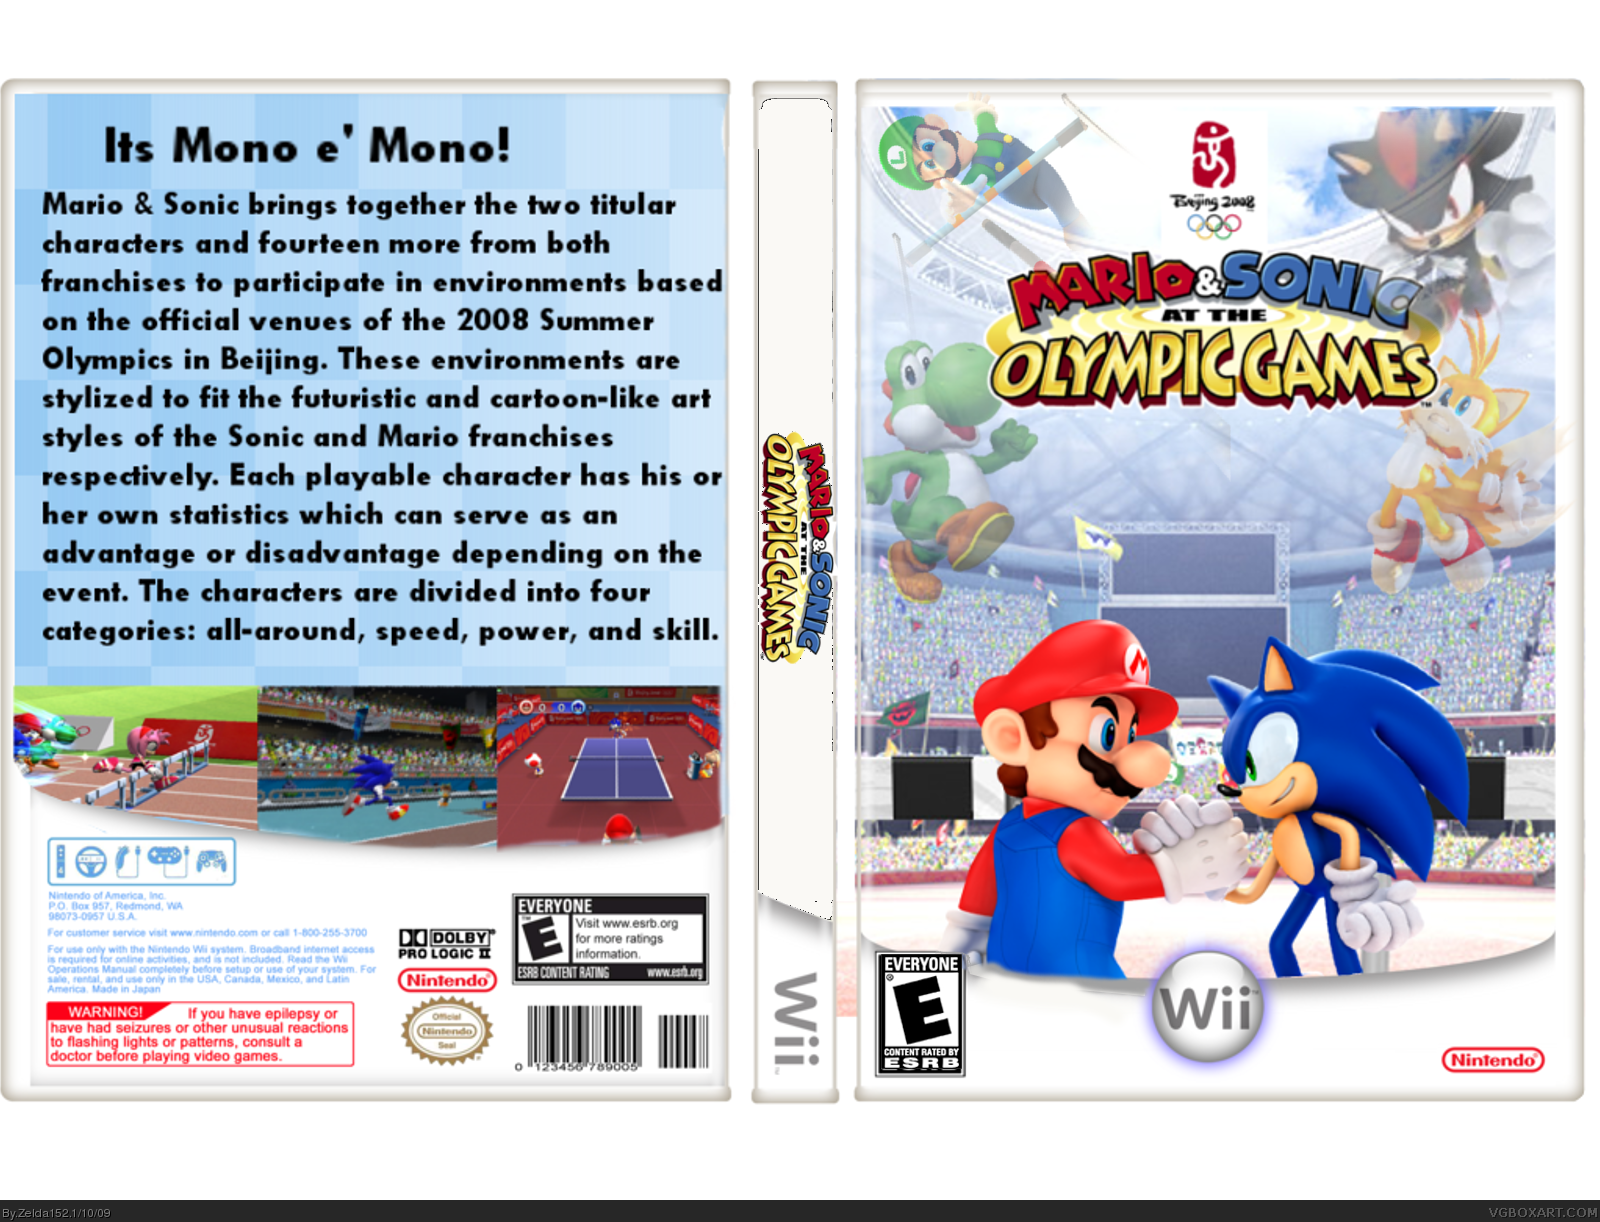 Mario & Sonic: At The Olympic Games box cover